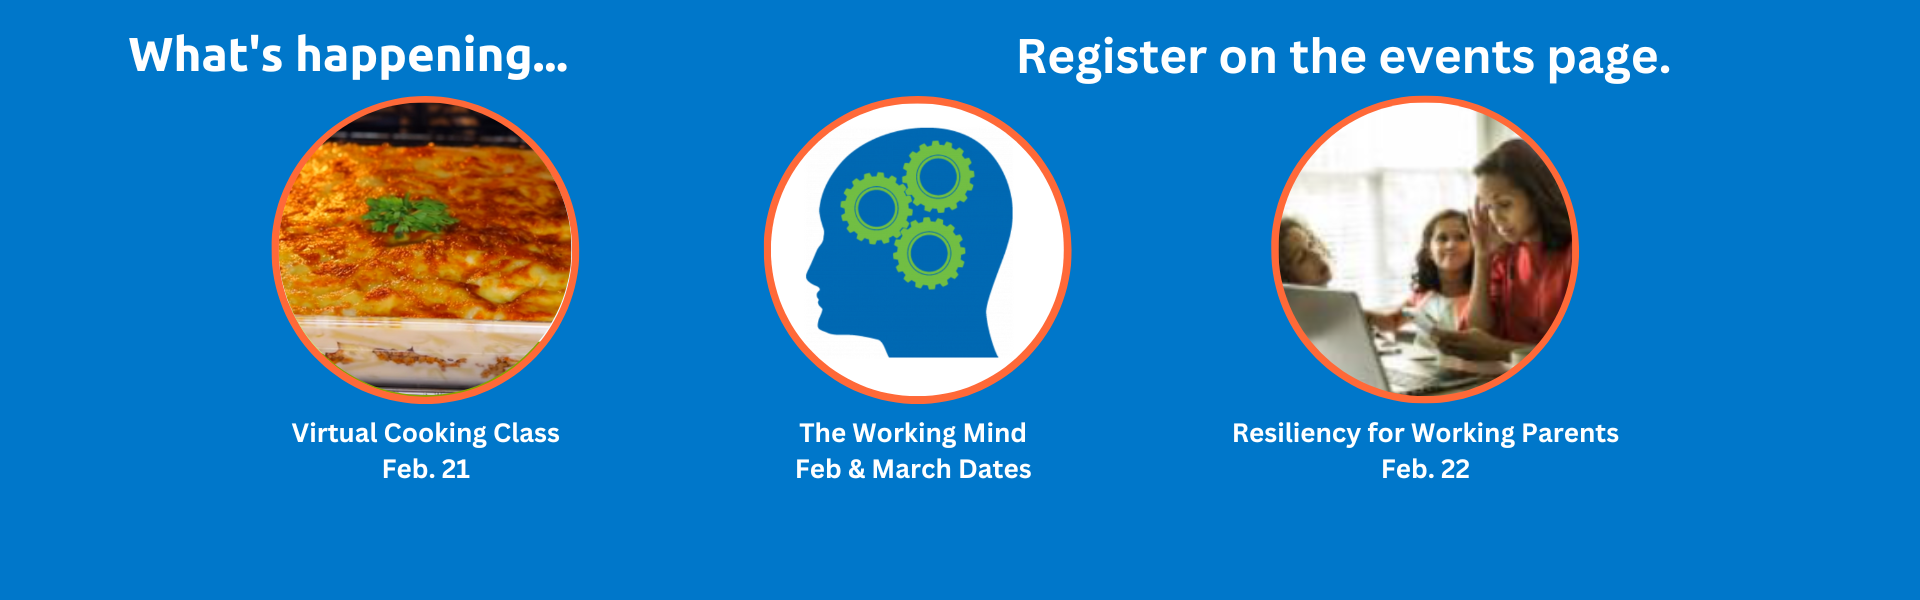 This image highlights upcoming events within Wellness at Work events and initiatives.